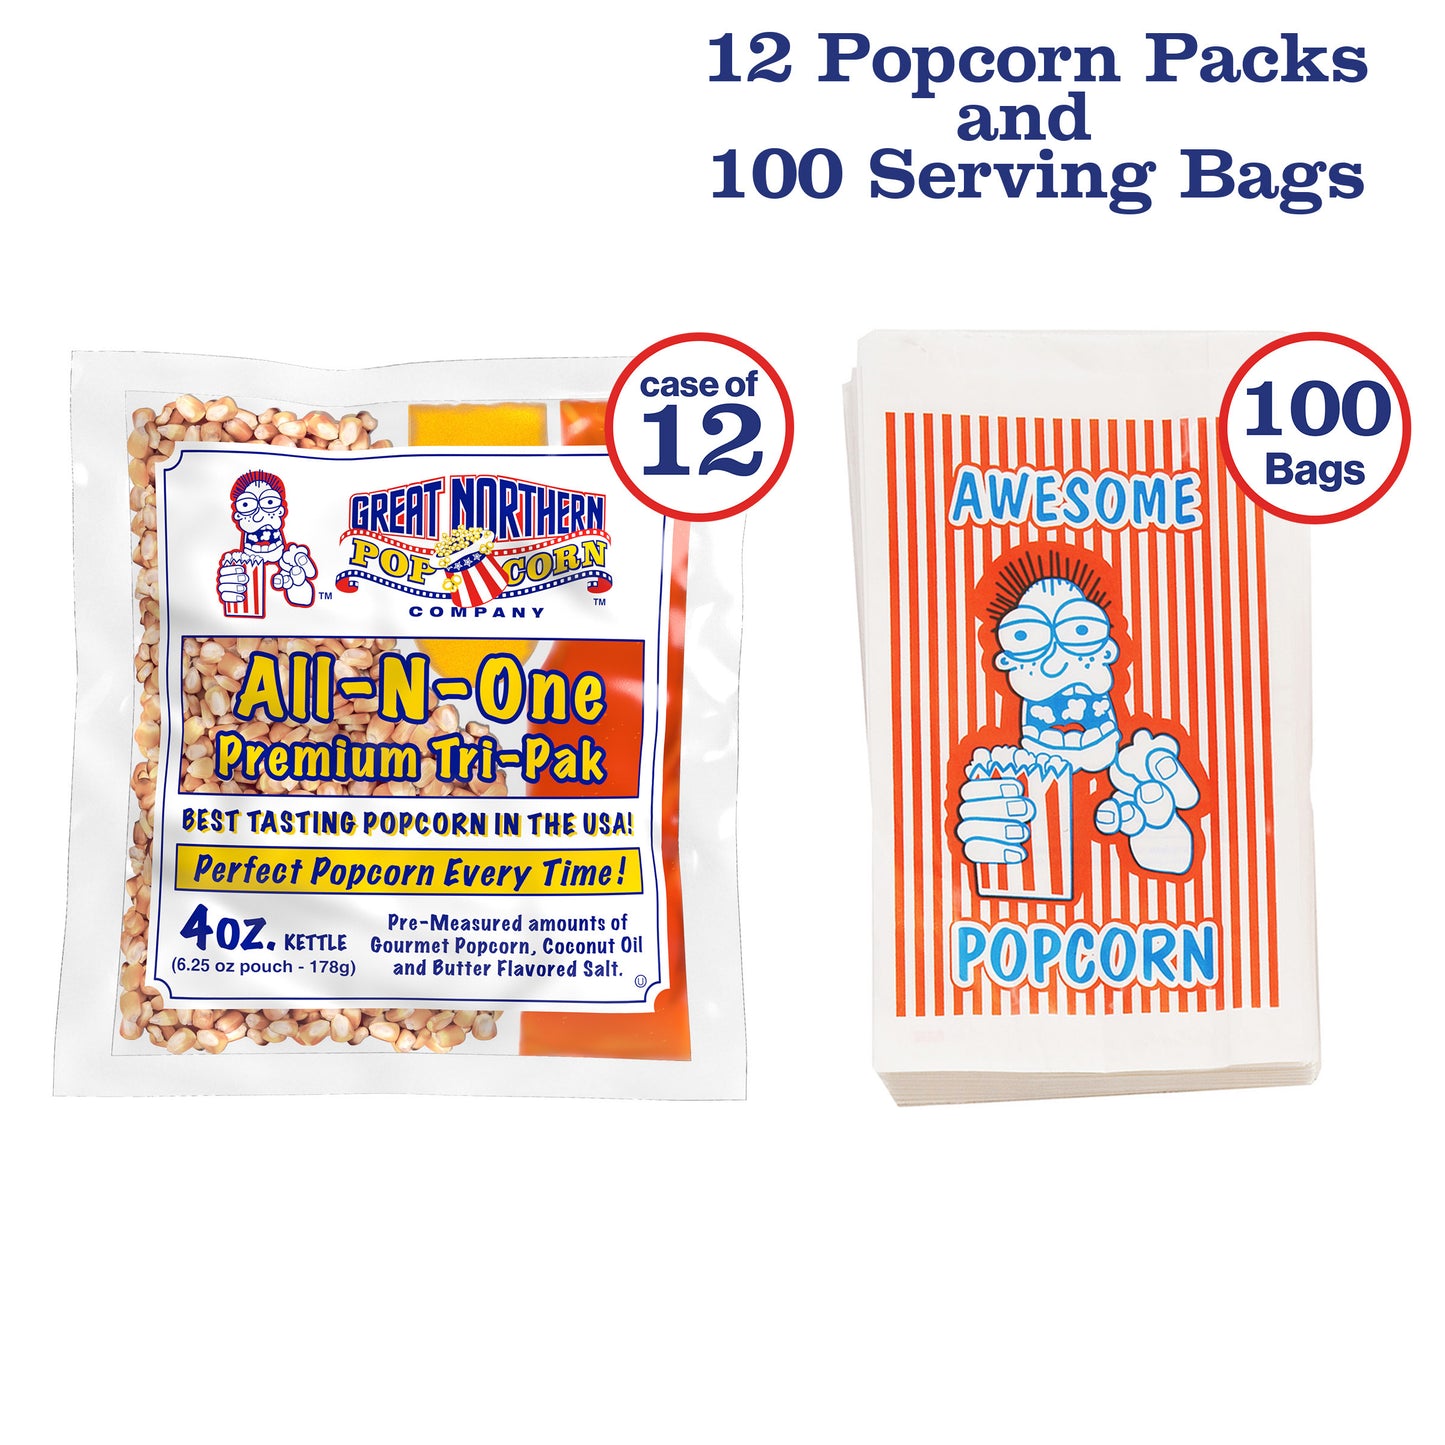 12oz Popcorn Packs and 100 Popcorn Bags – 24 Pre-Measured, All-in-One  Kernels, Salt, Oil Packets for Popcorn Machines by Great Northern Popcorn 